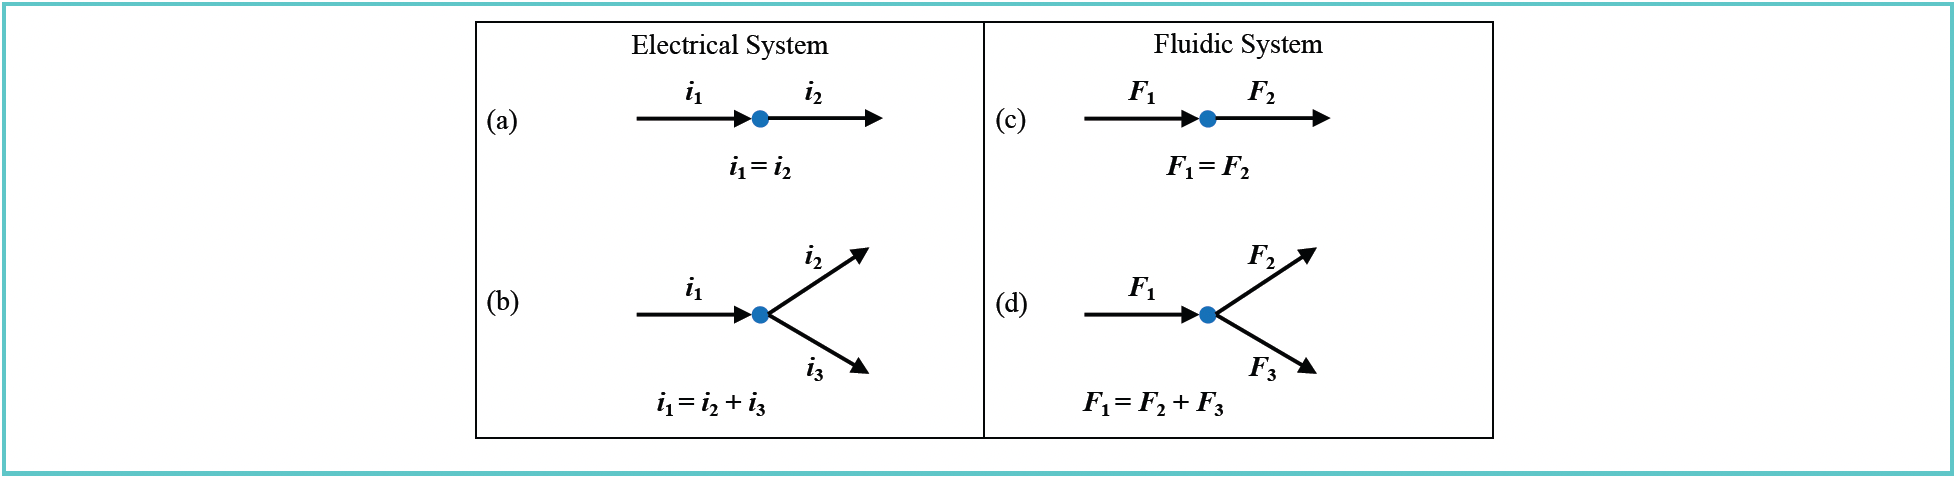 FIGURE 3: Illustration of the application of Kirchhoff’s Current Law to a simple electrical system involving (a,b) components connected at junctions, and (c,d) comparable illustrations of junctions in a fluidic system.